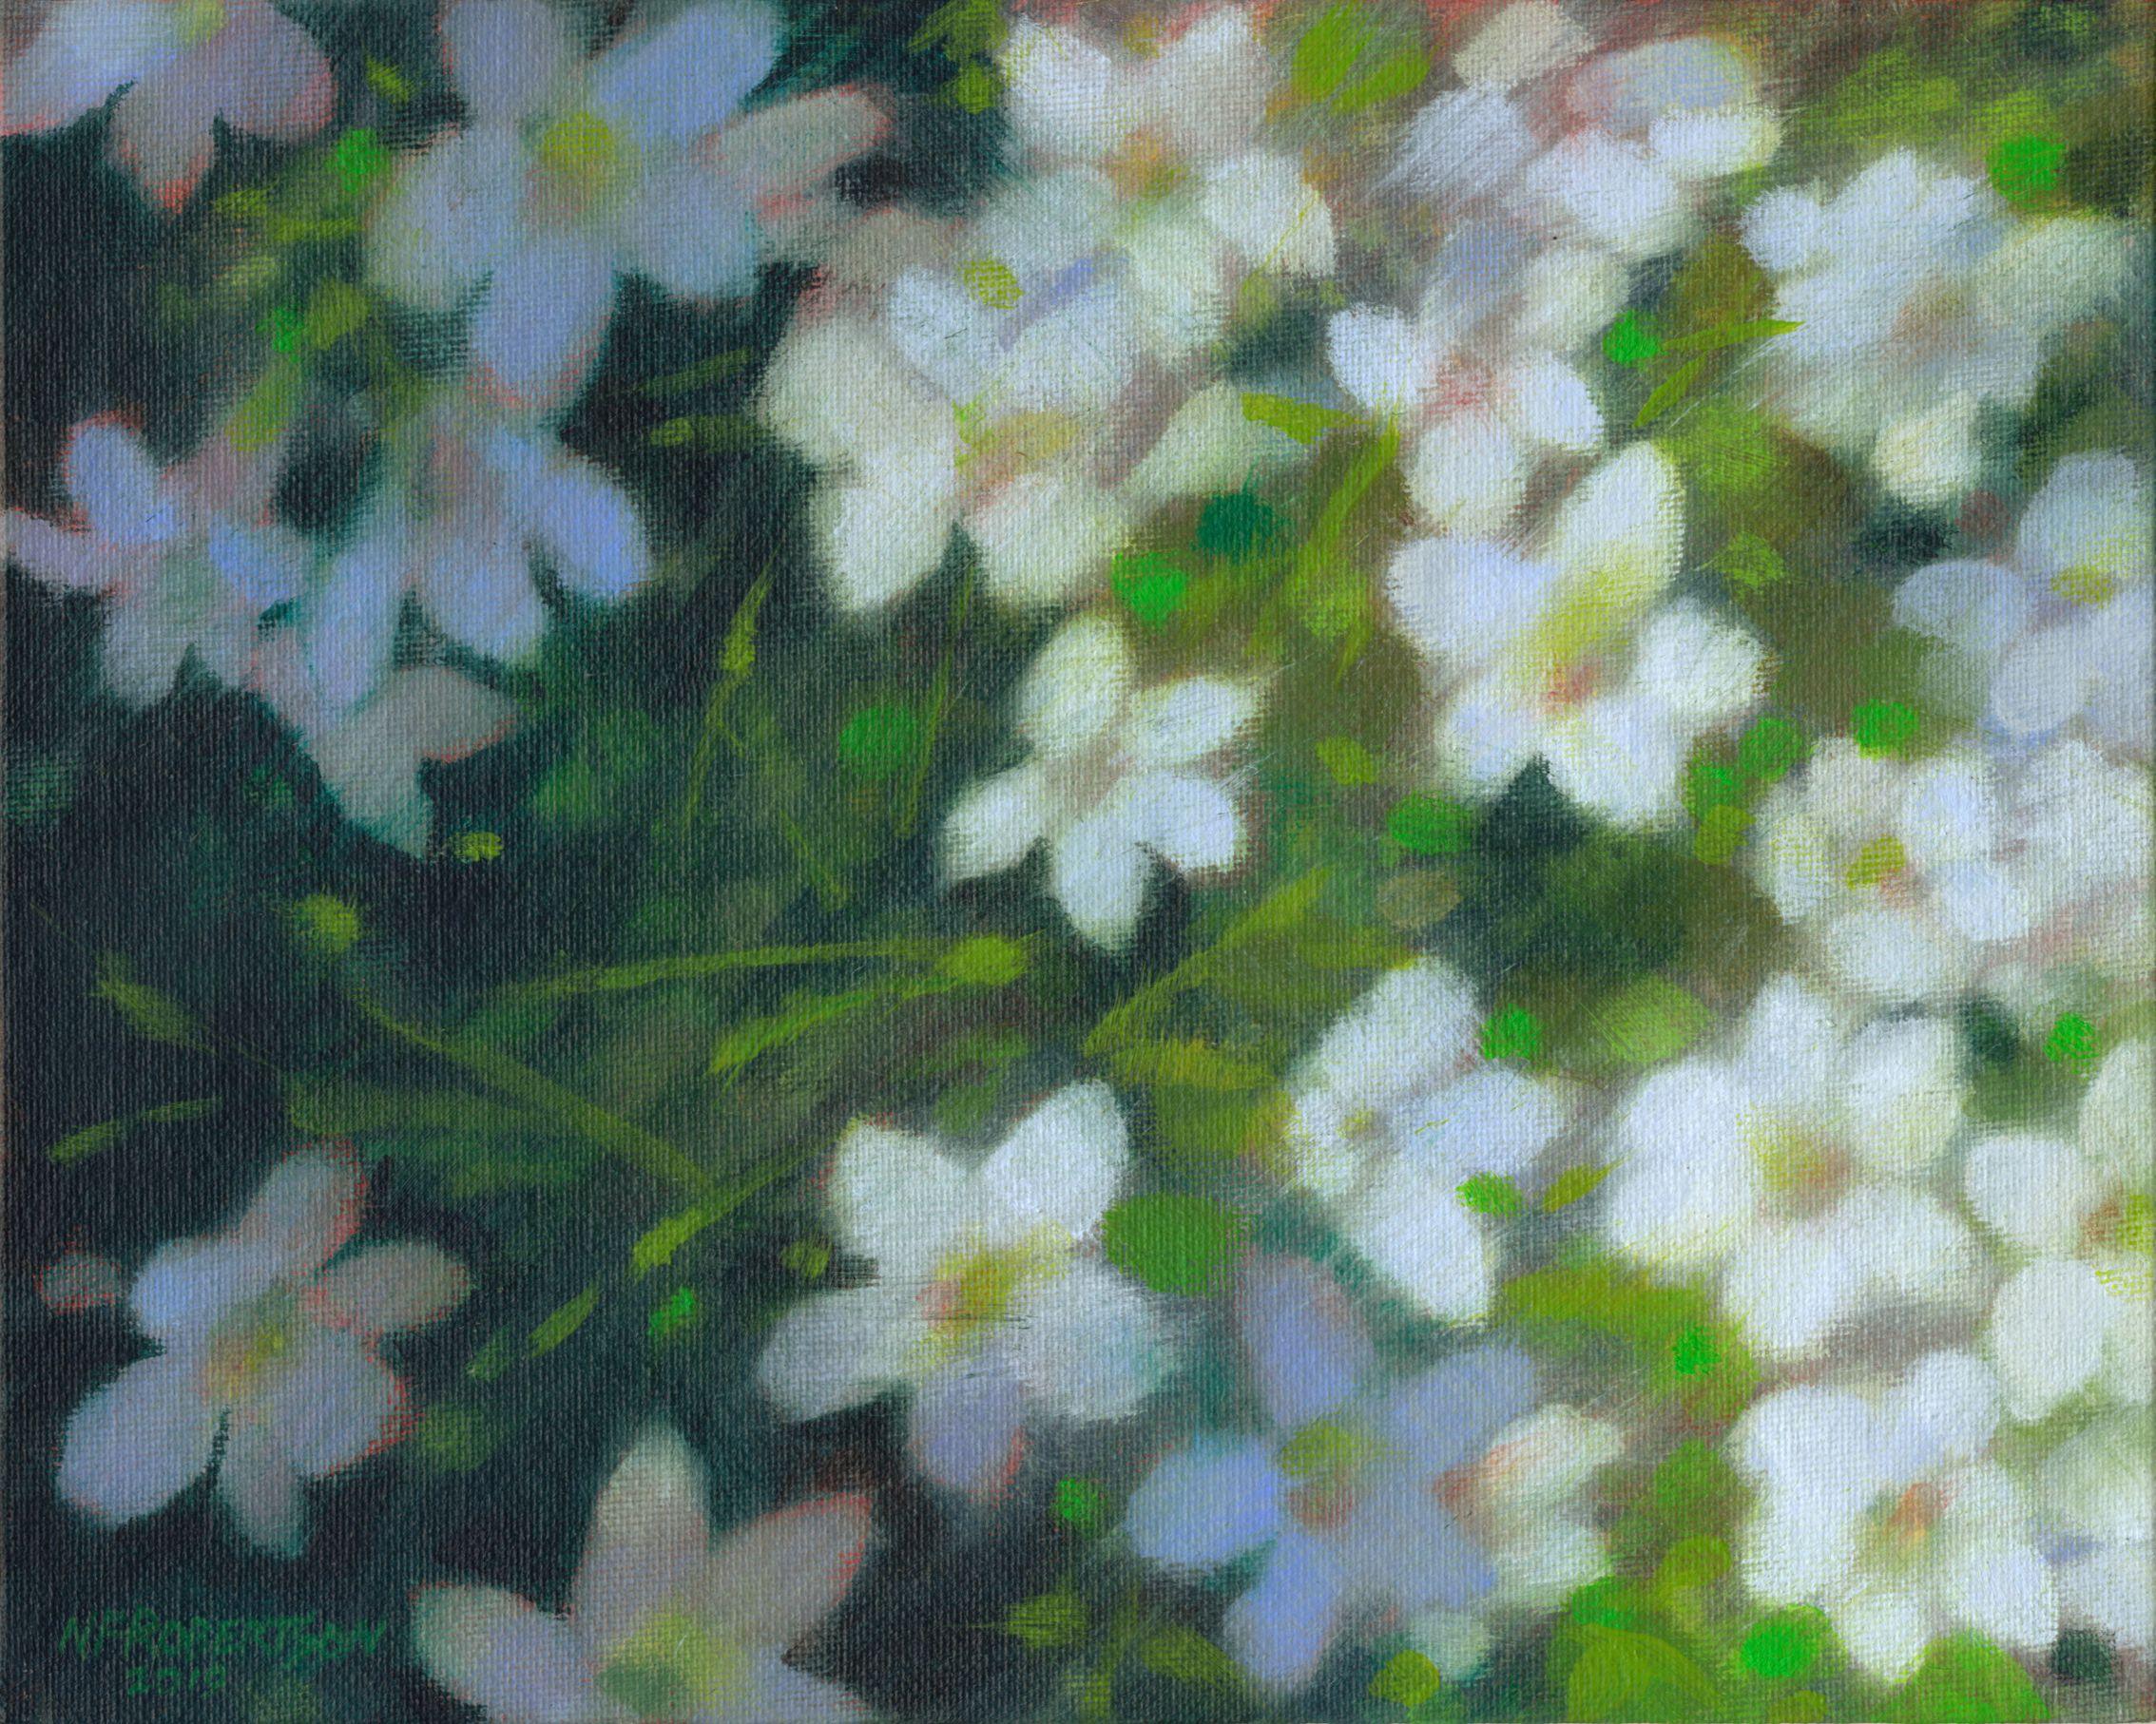 These ground hugging flowers were spotted while staying at Malham Cove, Yorkshire UK. I assume they are some type of wild Saxifrage as they were growing in a such a rugged place. I wanted to paint them as I originally saw them - fleetingly. Using my